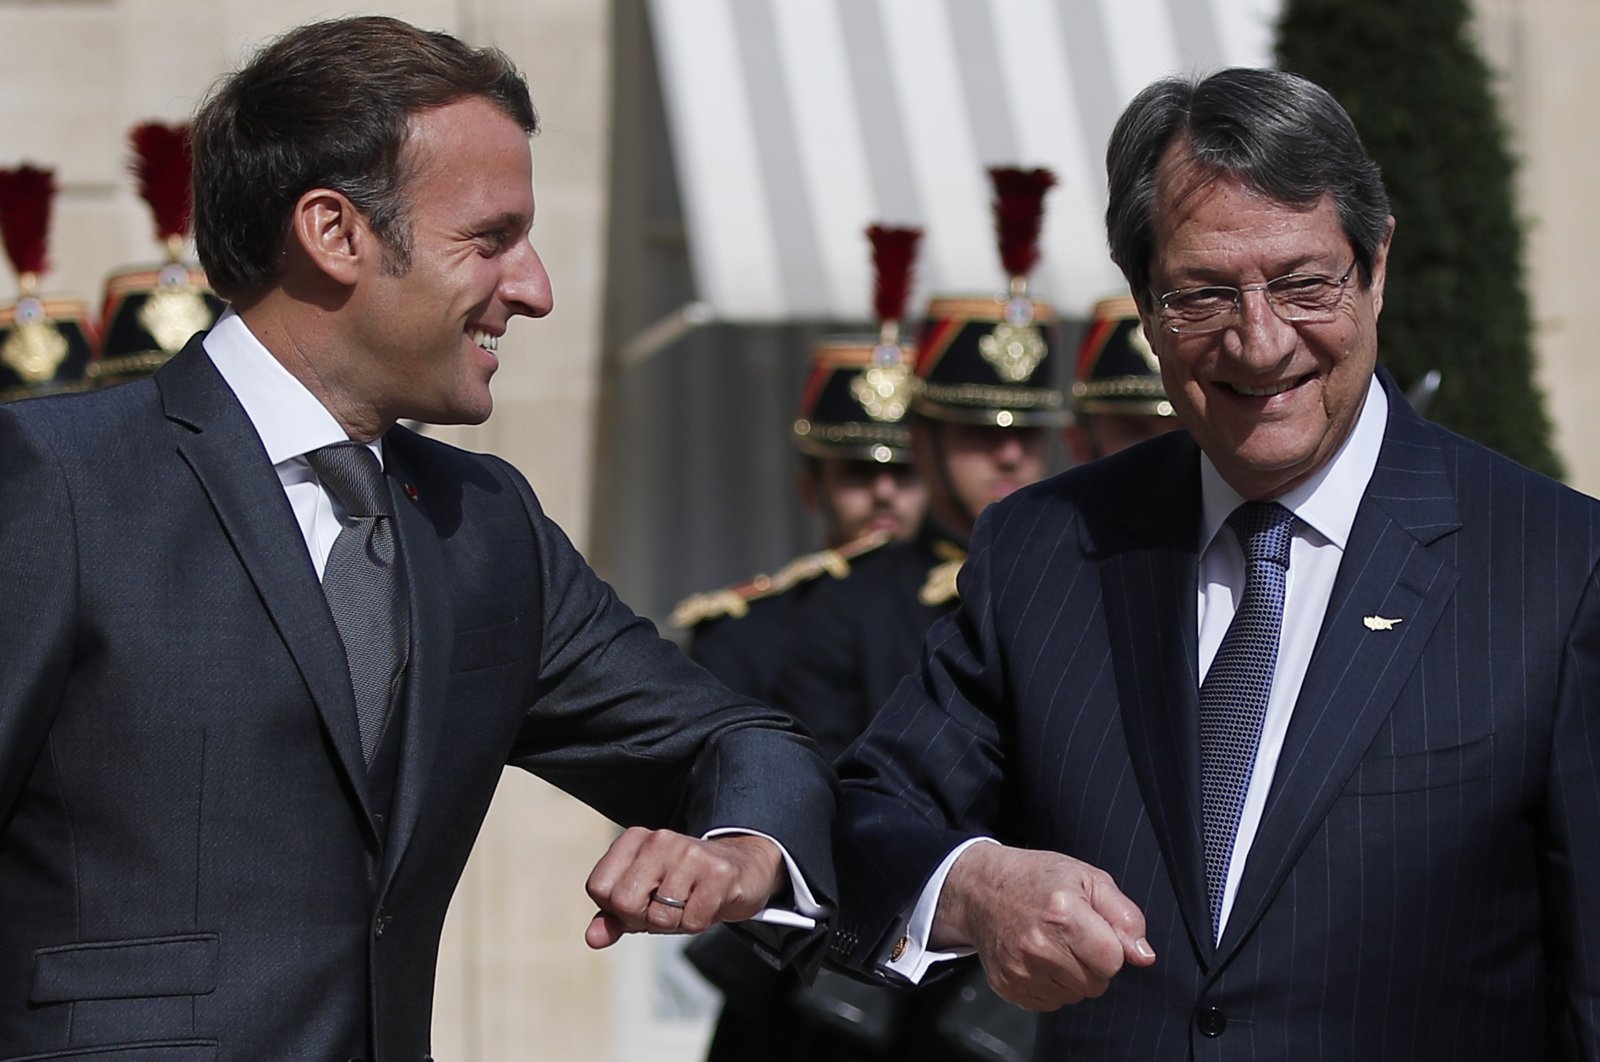 French President Emmanuel Macron, left, touches elbow as he welcomes Greek-Cypriot leader Nicos Anastasiades upon his arrival at the Elysee Palace, in Paris, Thursday, July 23, 2020. (AP Photo)